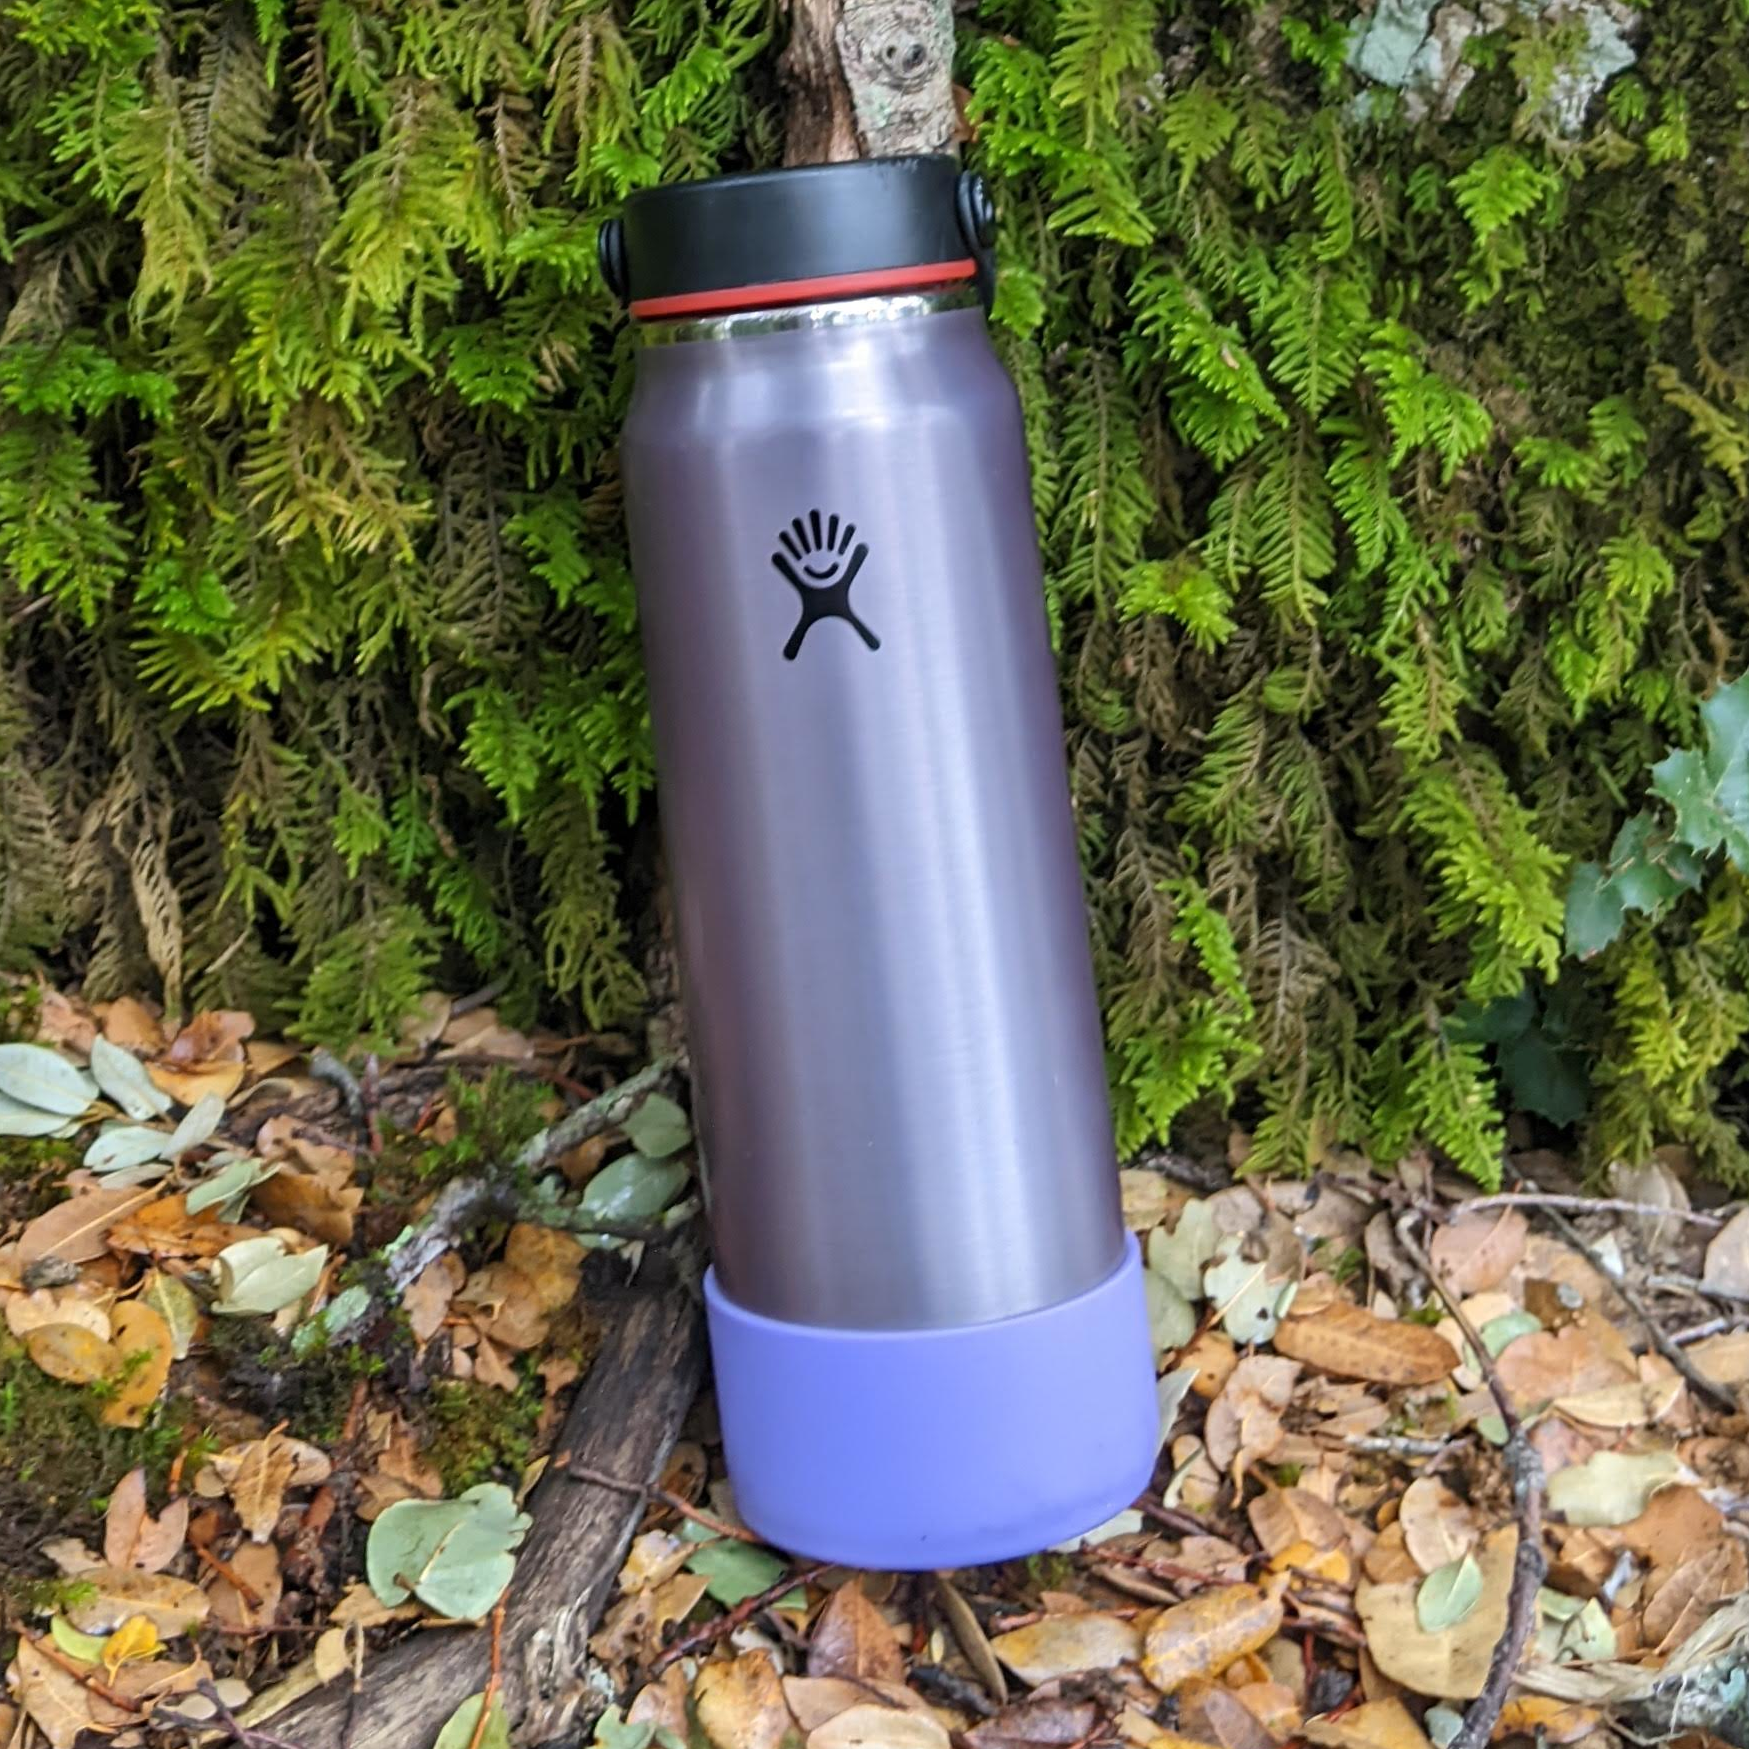 Bottlebutts™ Silicone Boot for Hydro Flask Lightweight Trail Series 32oz/ 40oz in BROWN 